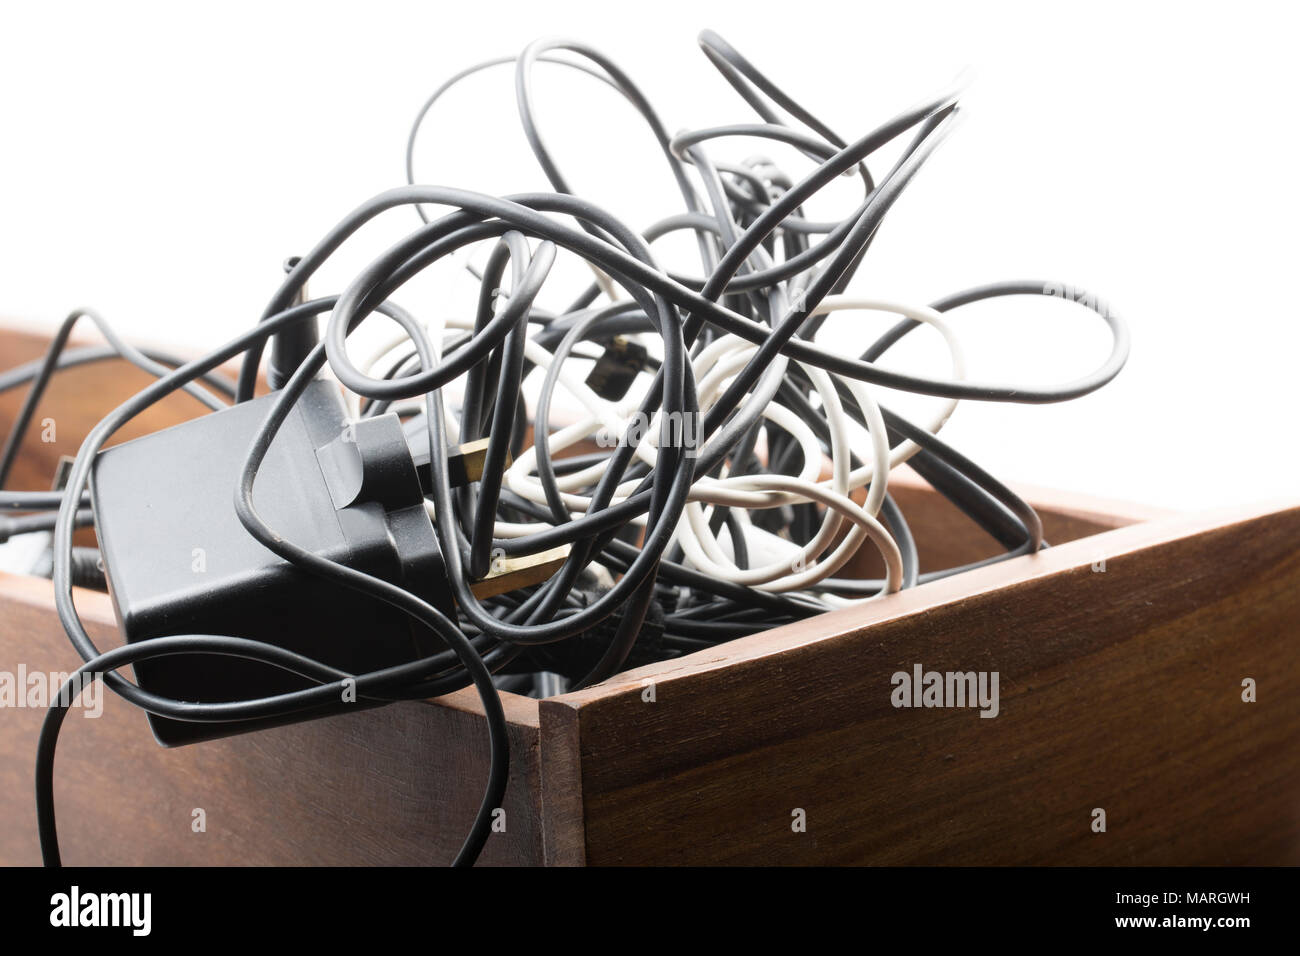 Old and defunct mobile phone, battery and usb cables that have been stuffed in a drawer. UK Stock Photo